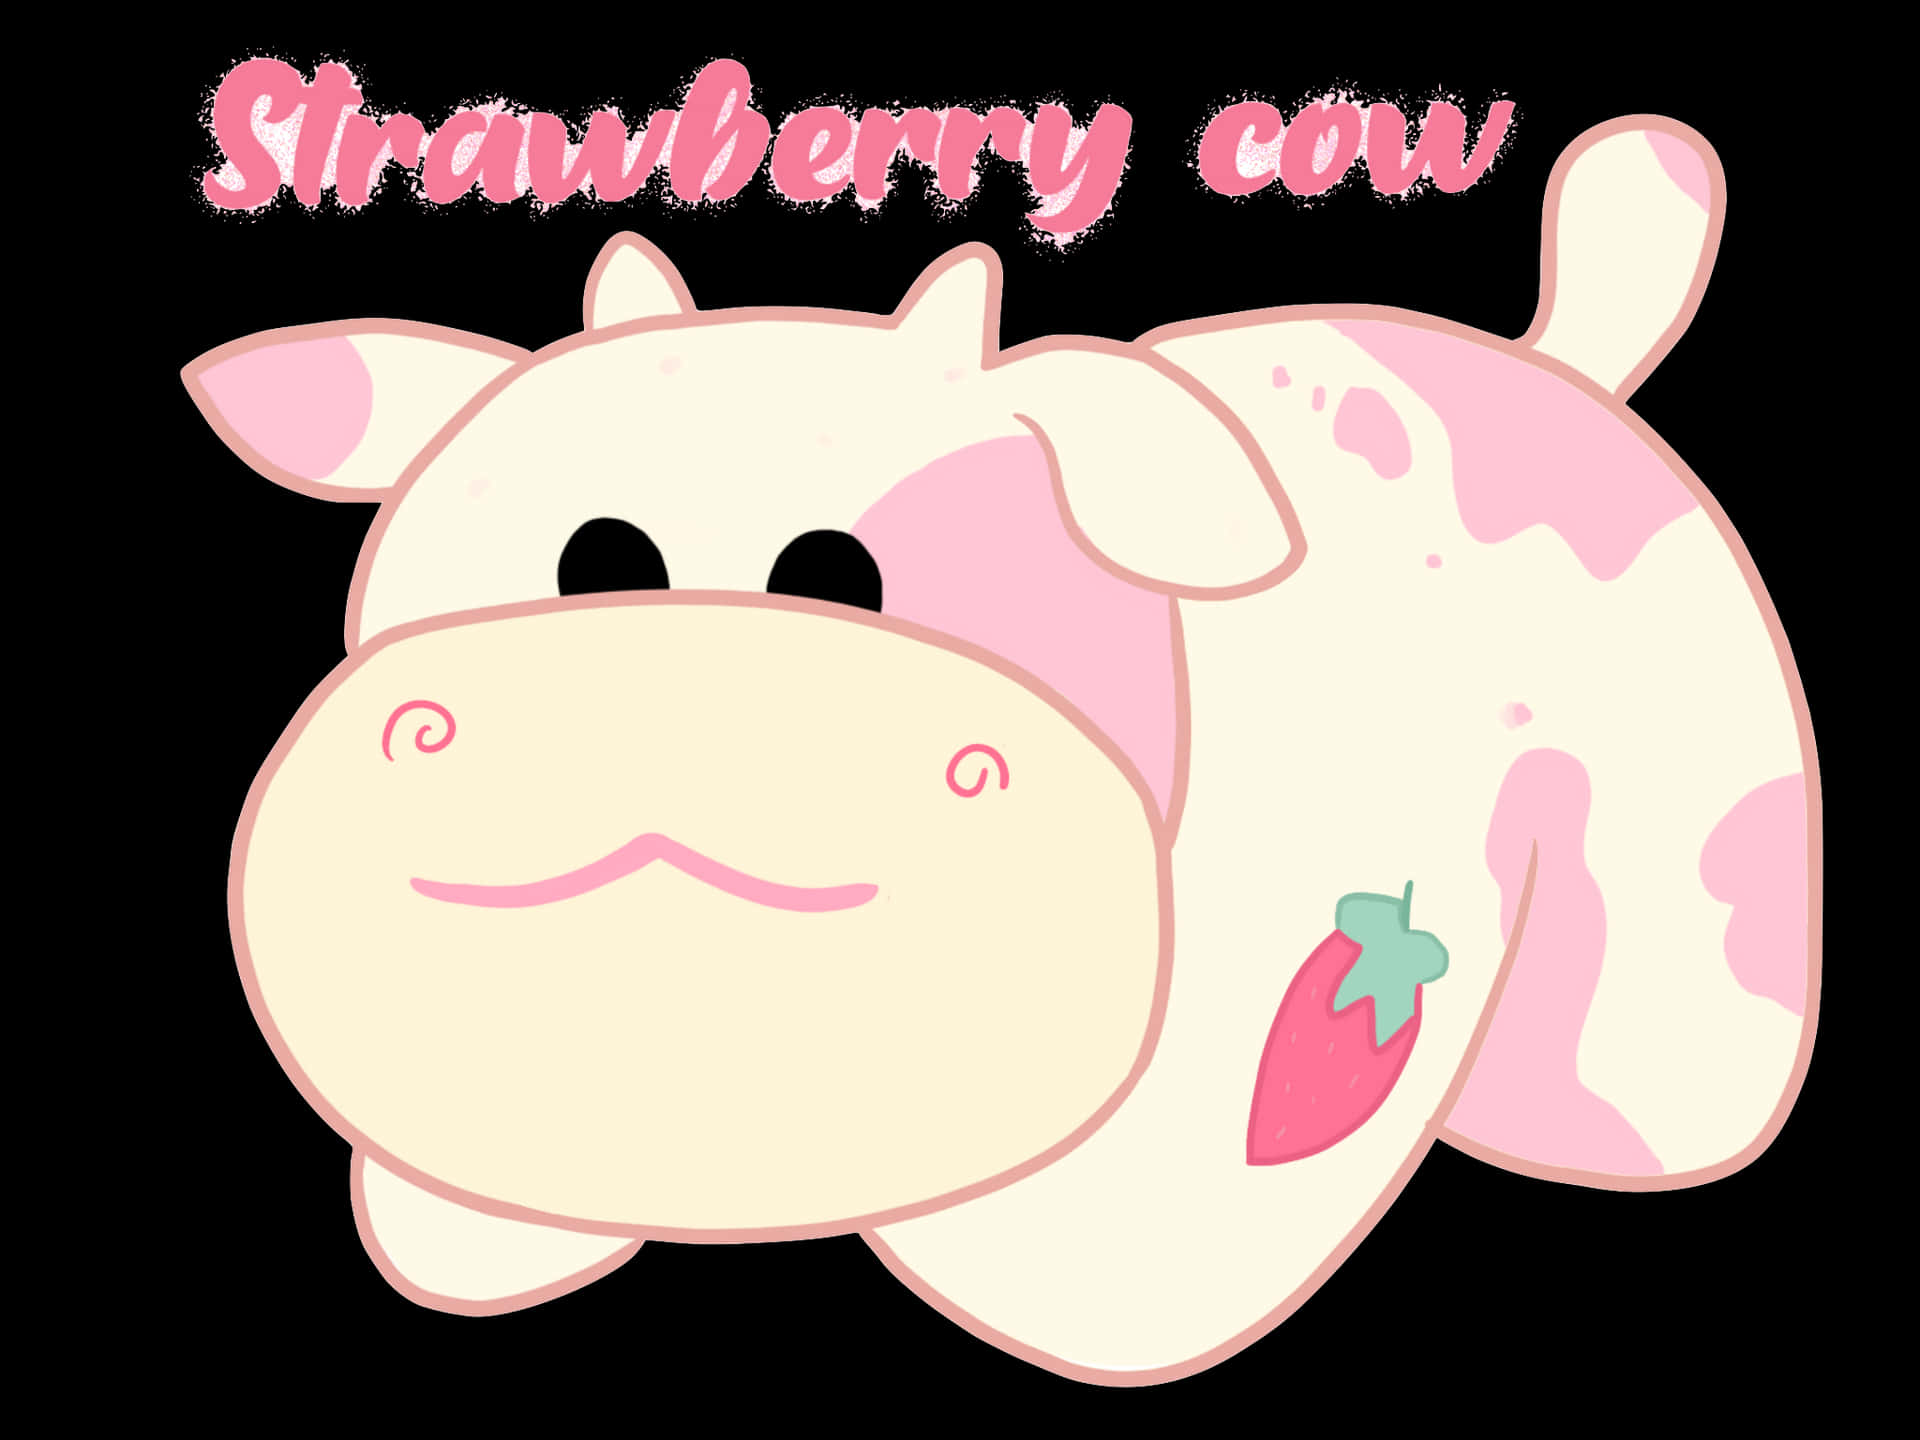 Moo-ving day to day with Kawaii Cow Wallpaper